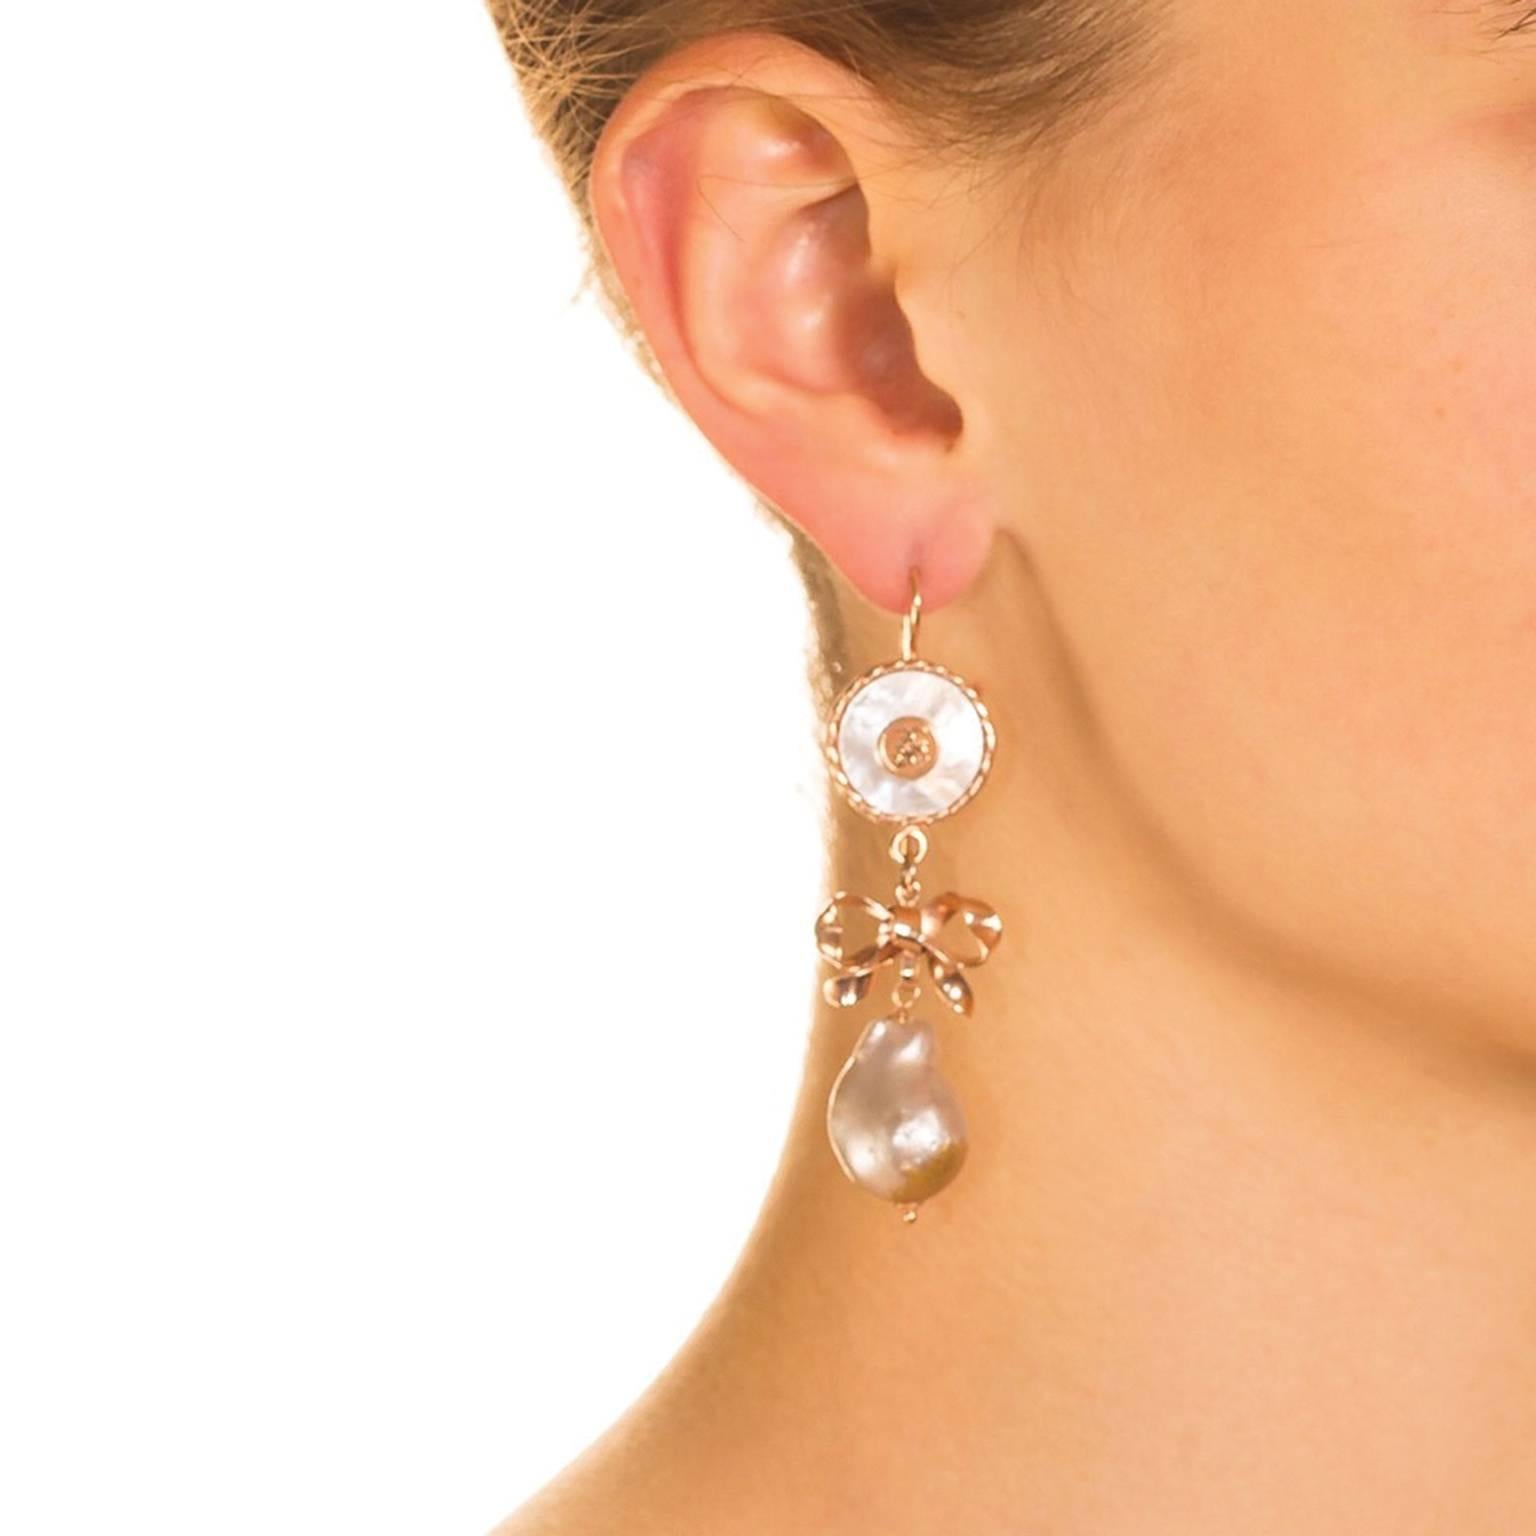 Victorian style with a modern edge, these graceful, feminine earrings are an expression of simple elegance.   Three elegant components combine to create a sophisticated work of wearable art.  Start with our classic ‘Simply Chic’ top – a CdG coat of